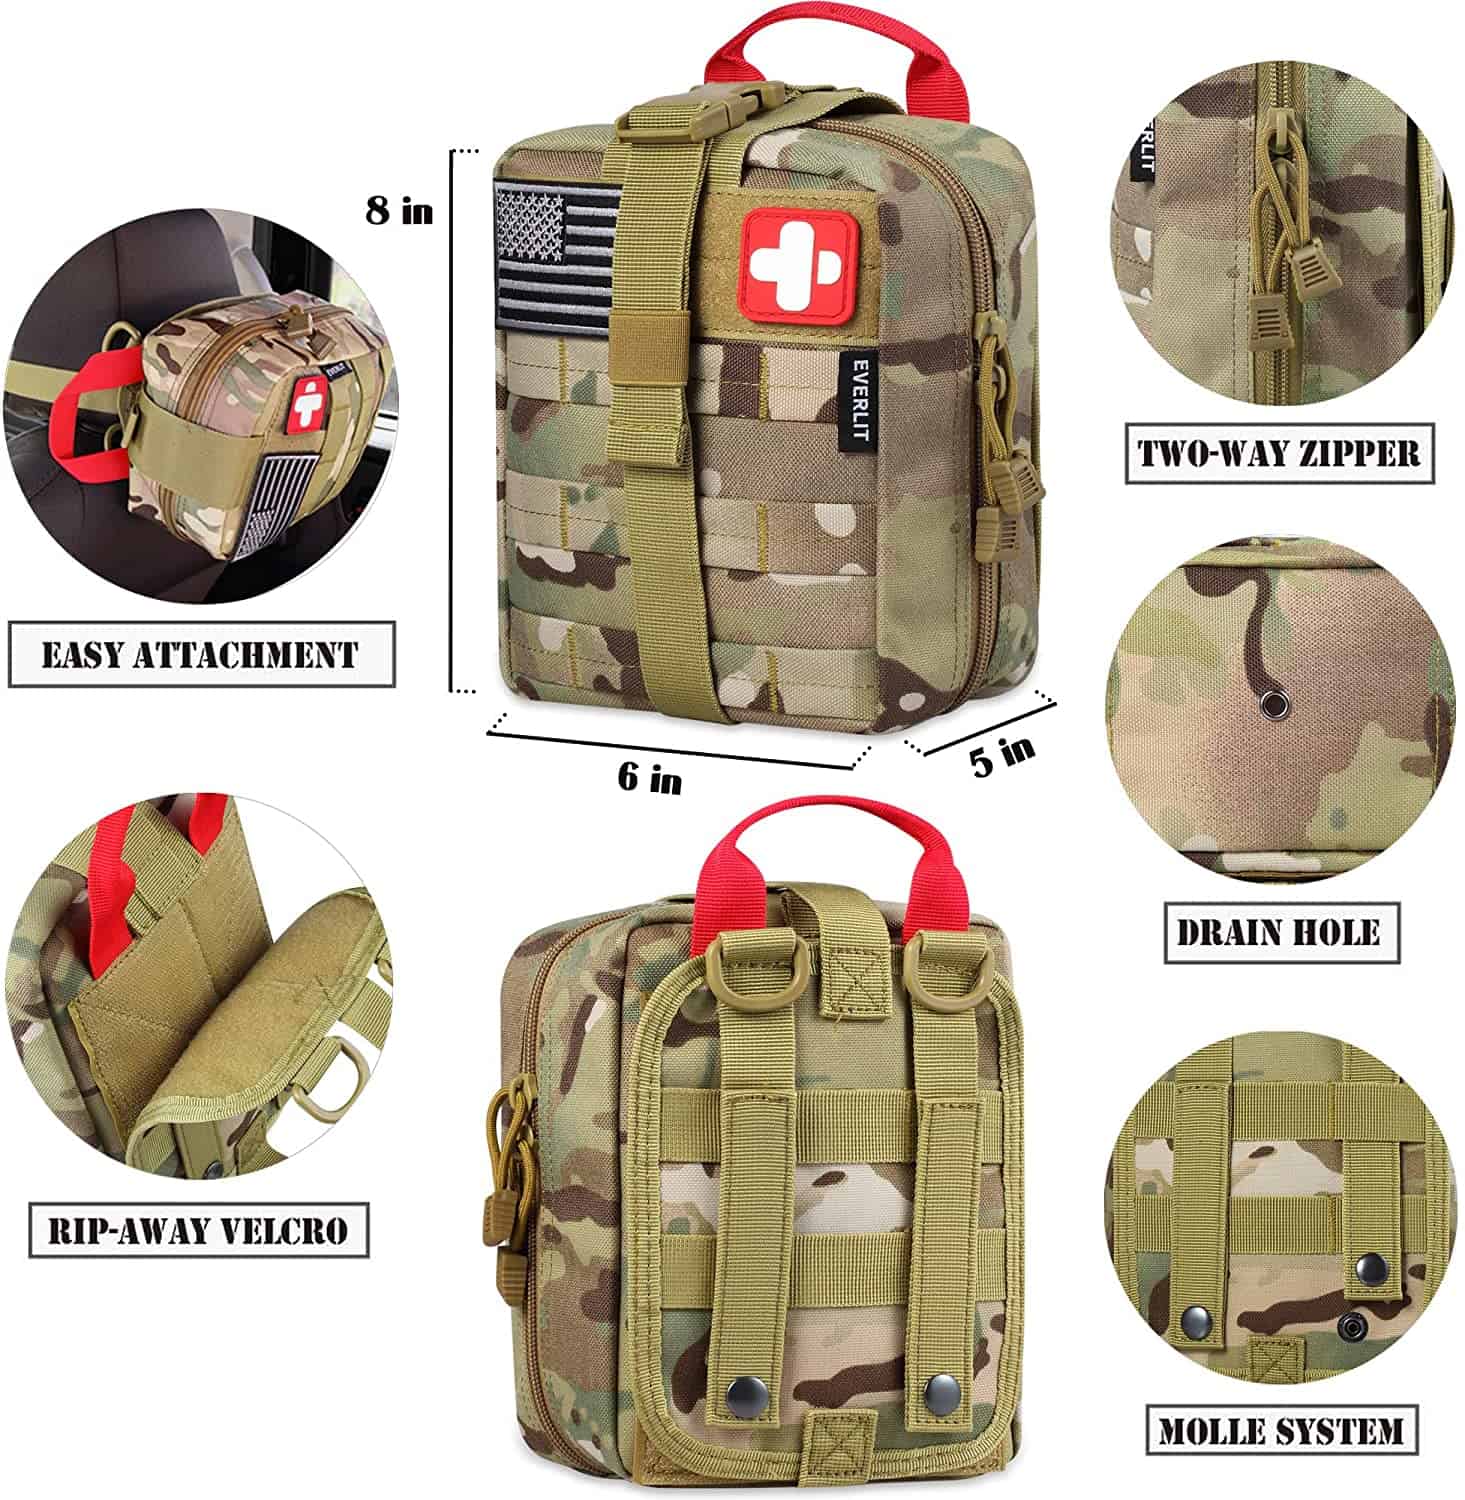 Camo Survival First Aid Kit Contains Contains 250 Piece First Aid Kit - 2 